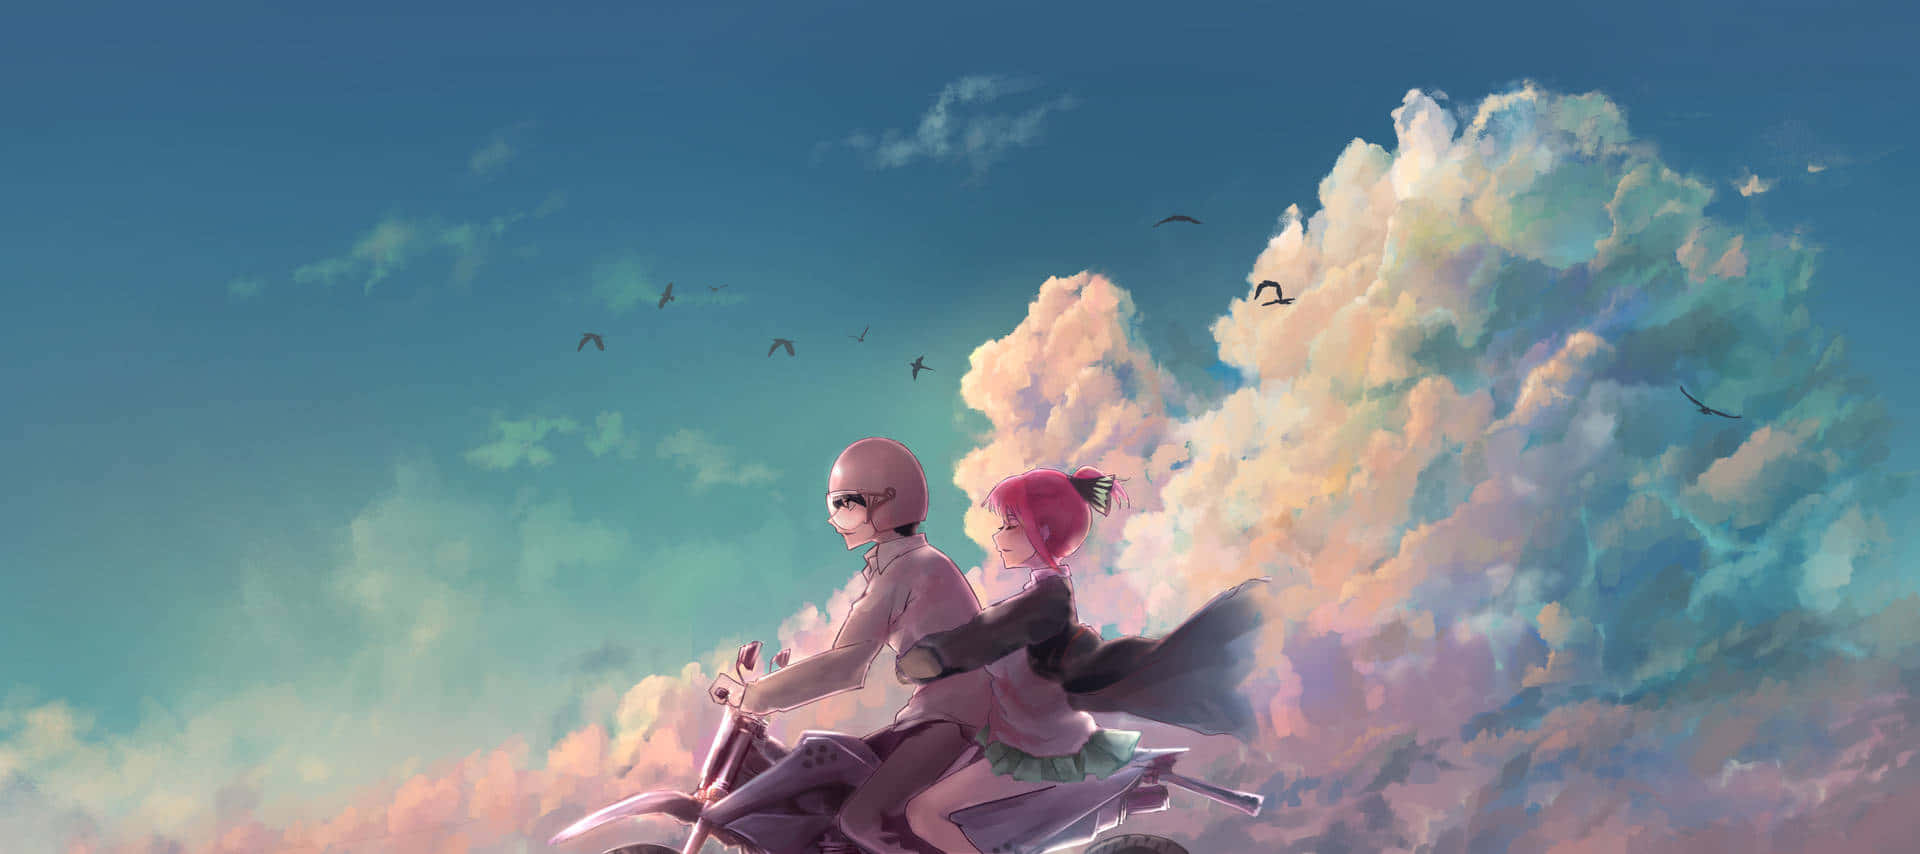 Wholesome Couple Enjoying A Motorcycle Ride